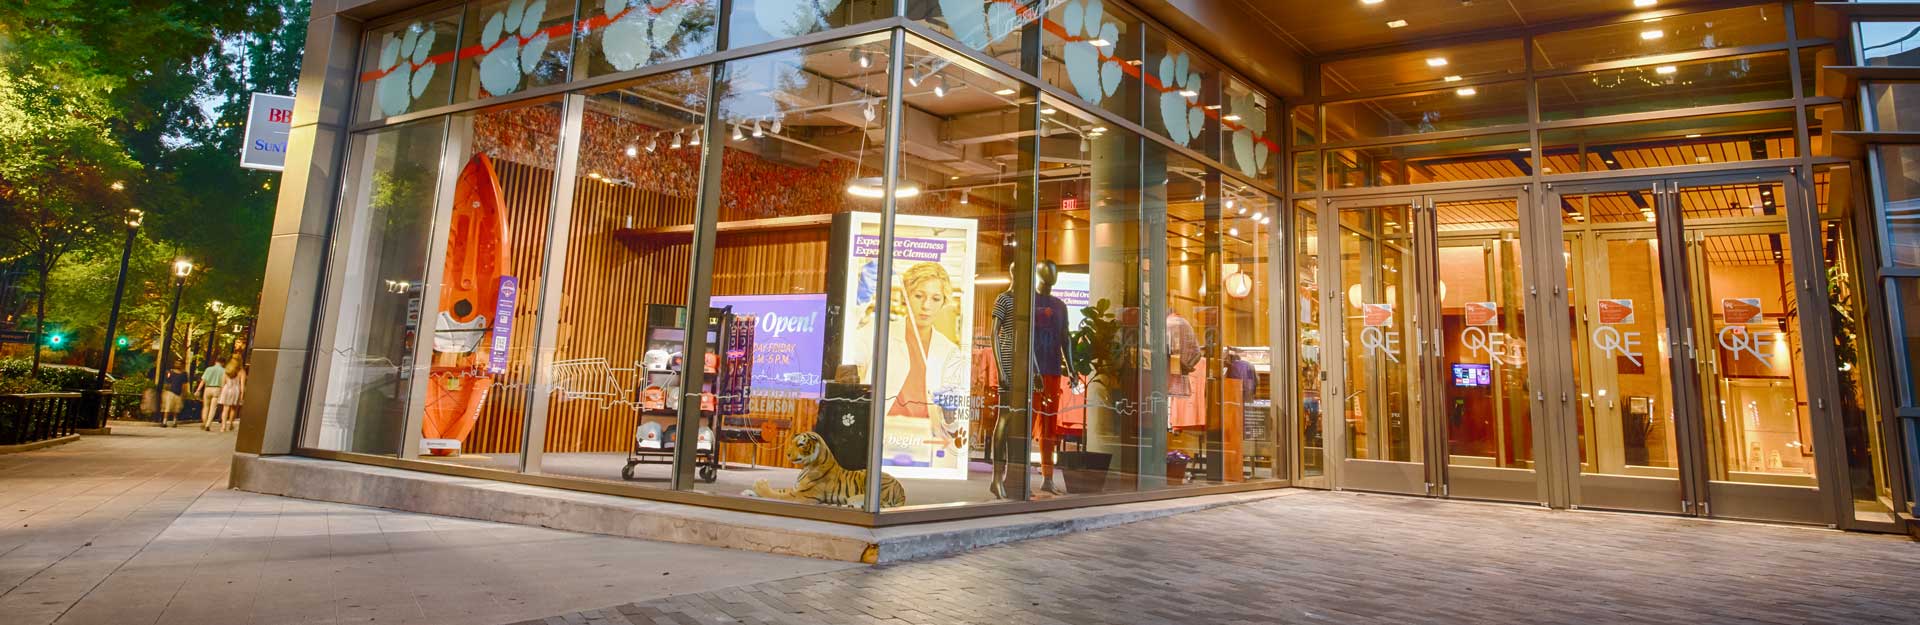 Exterior of the Clemson One building showing Clemson signage and retail products in a store window